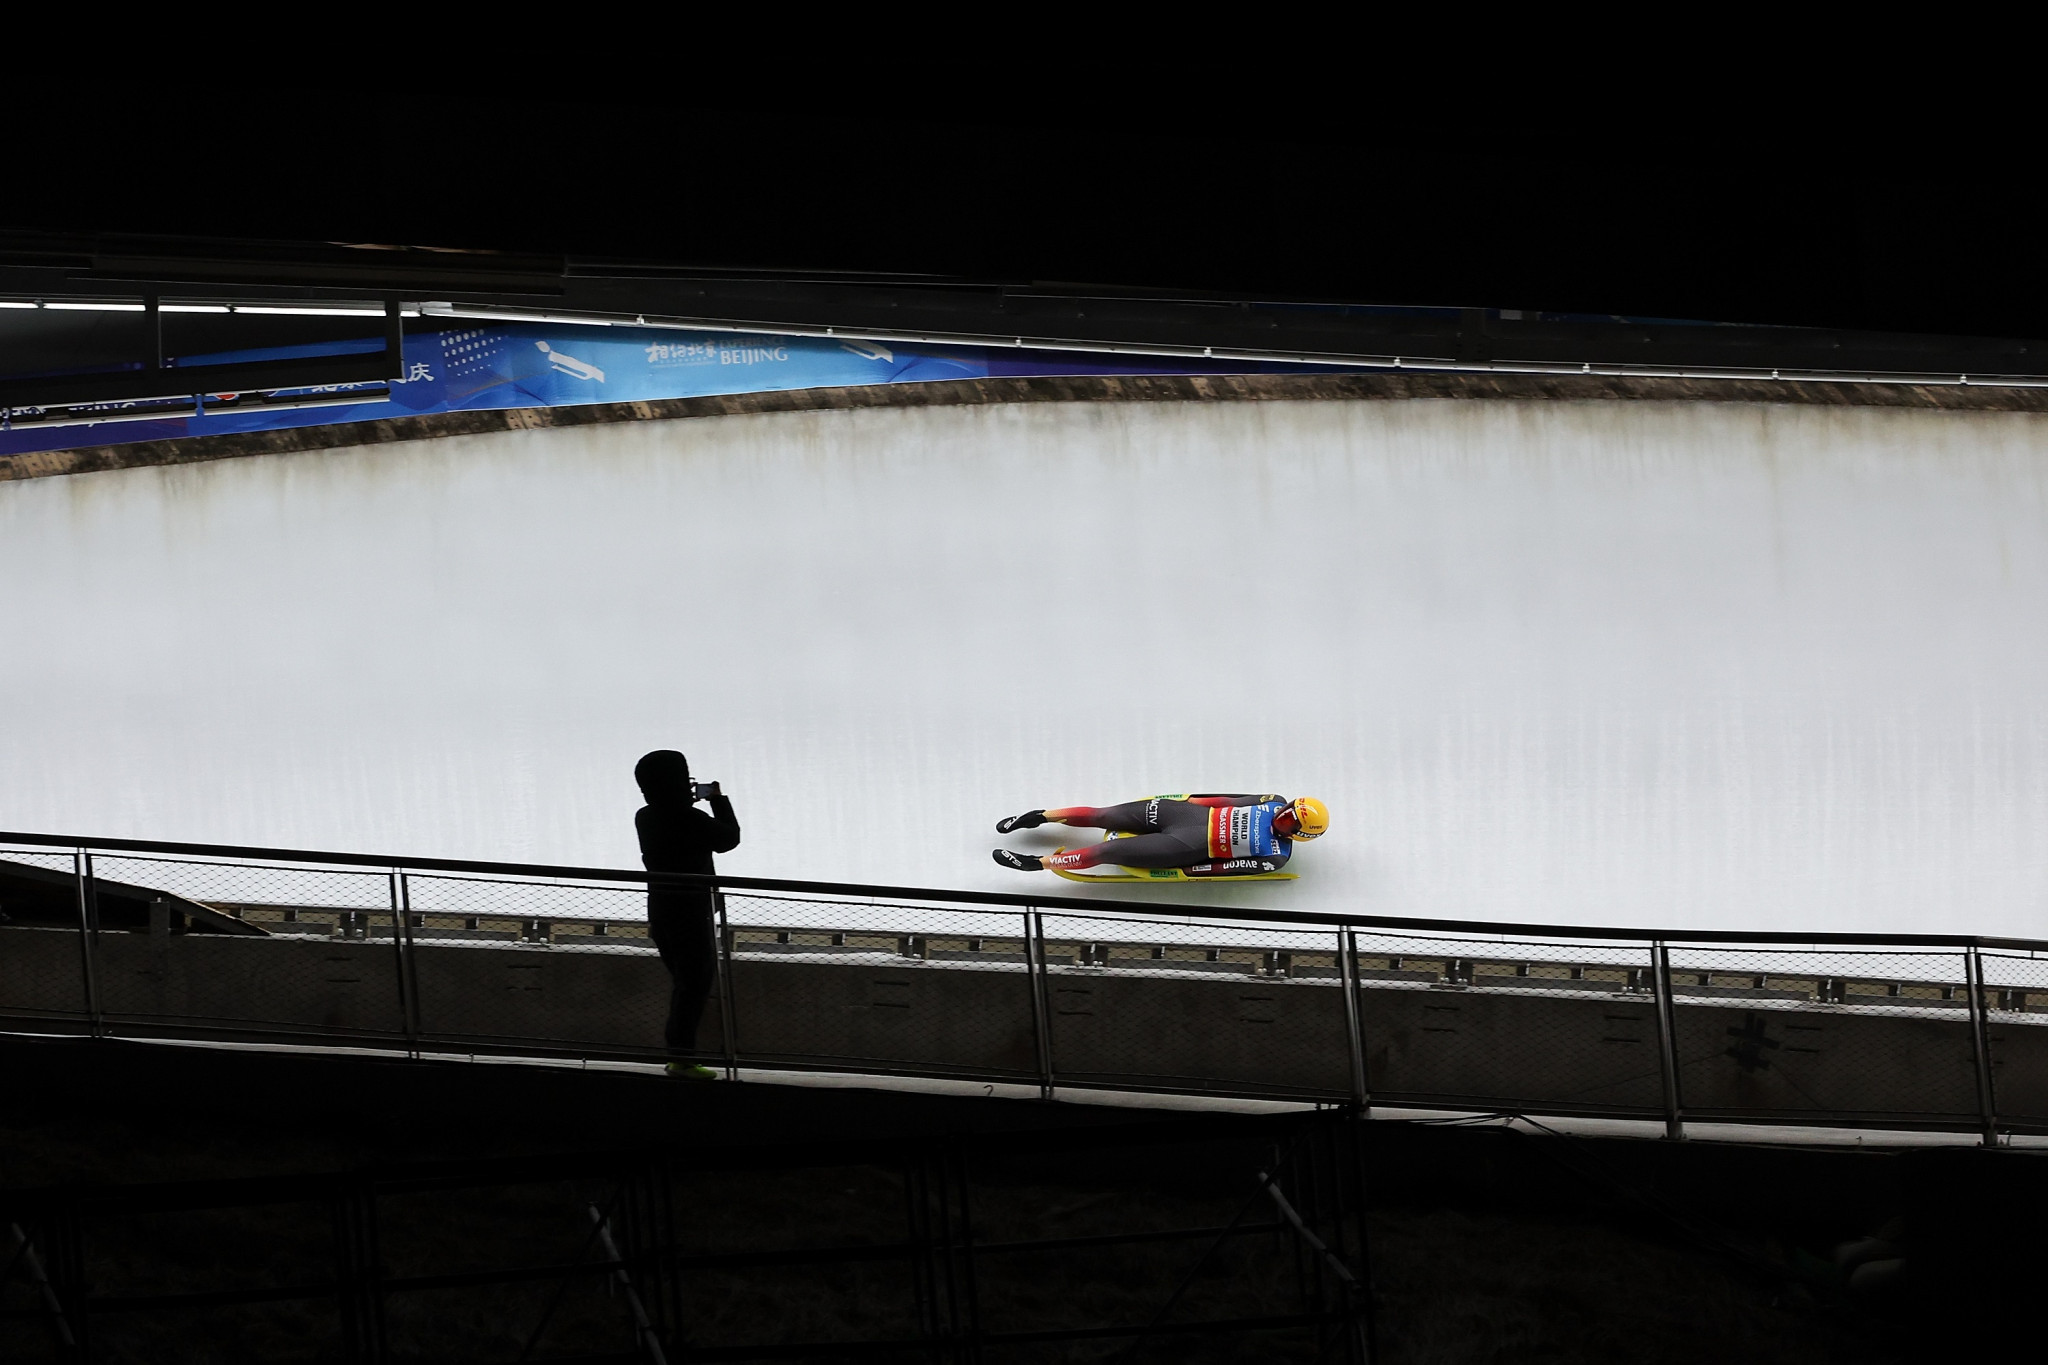 World champion Julia Taubitz tested the track that will be used at the Beijing 2022 Winter Olympics ©Getty Images